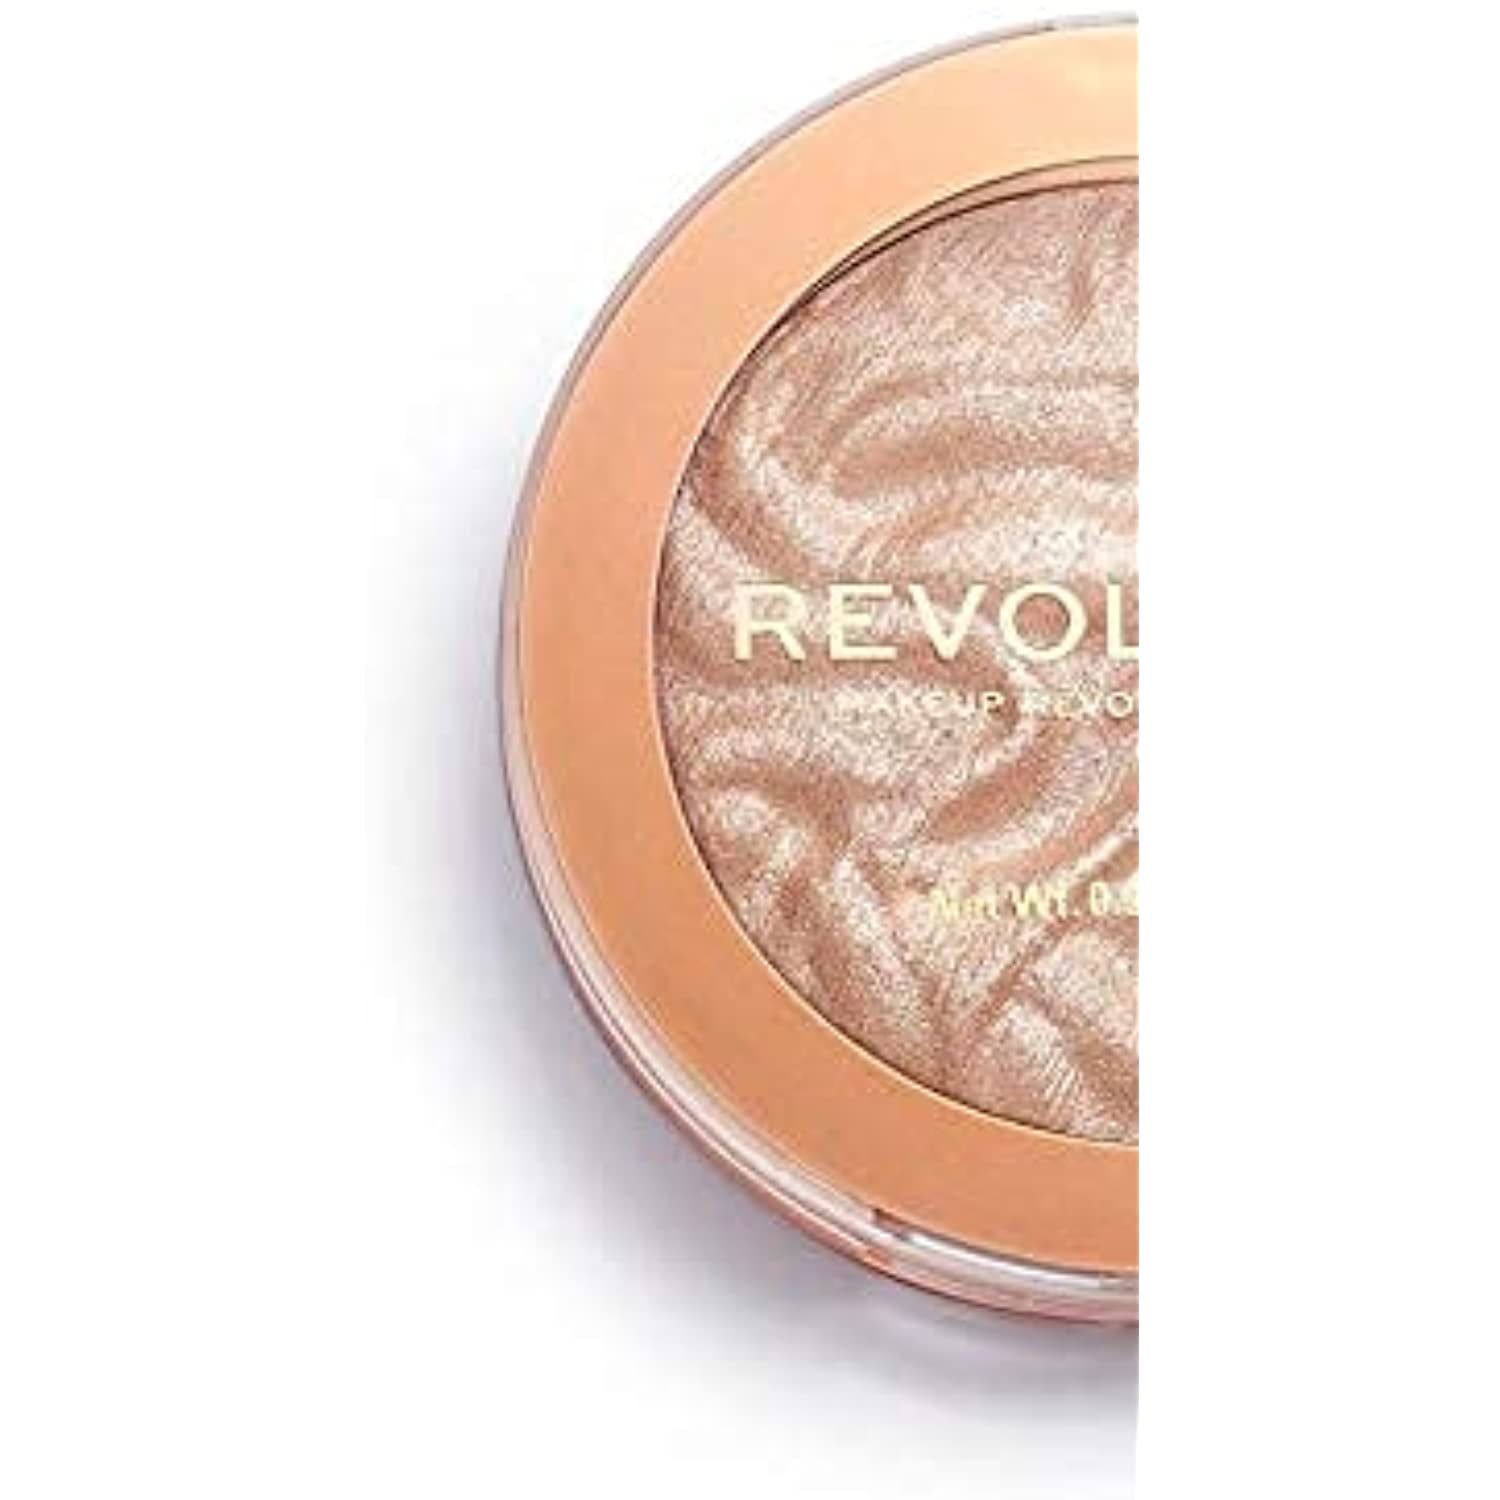 labyrint Brudgom Cruelty Makeup Revolution Blushing Hearts Highlighter, Dare to Divulge, Highlighter  Makeup, Compact Palette, Face Make Up, All in One Super Sized Compact -  Walmart.com